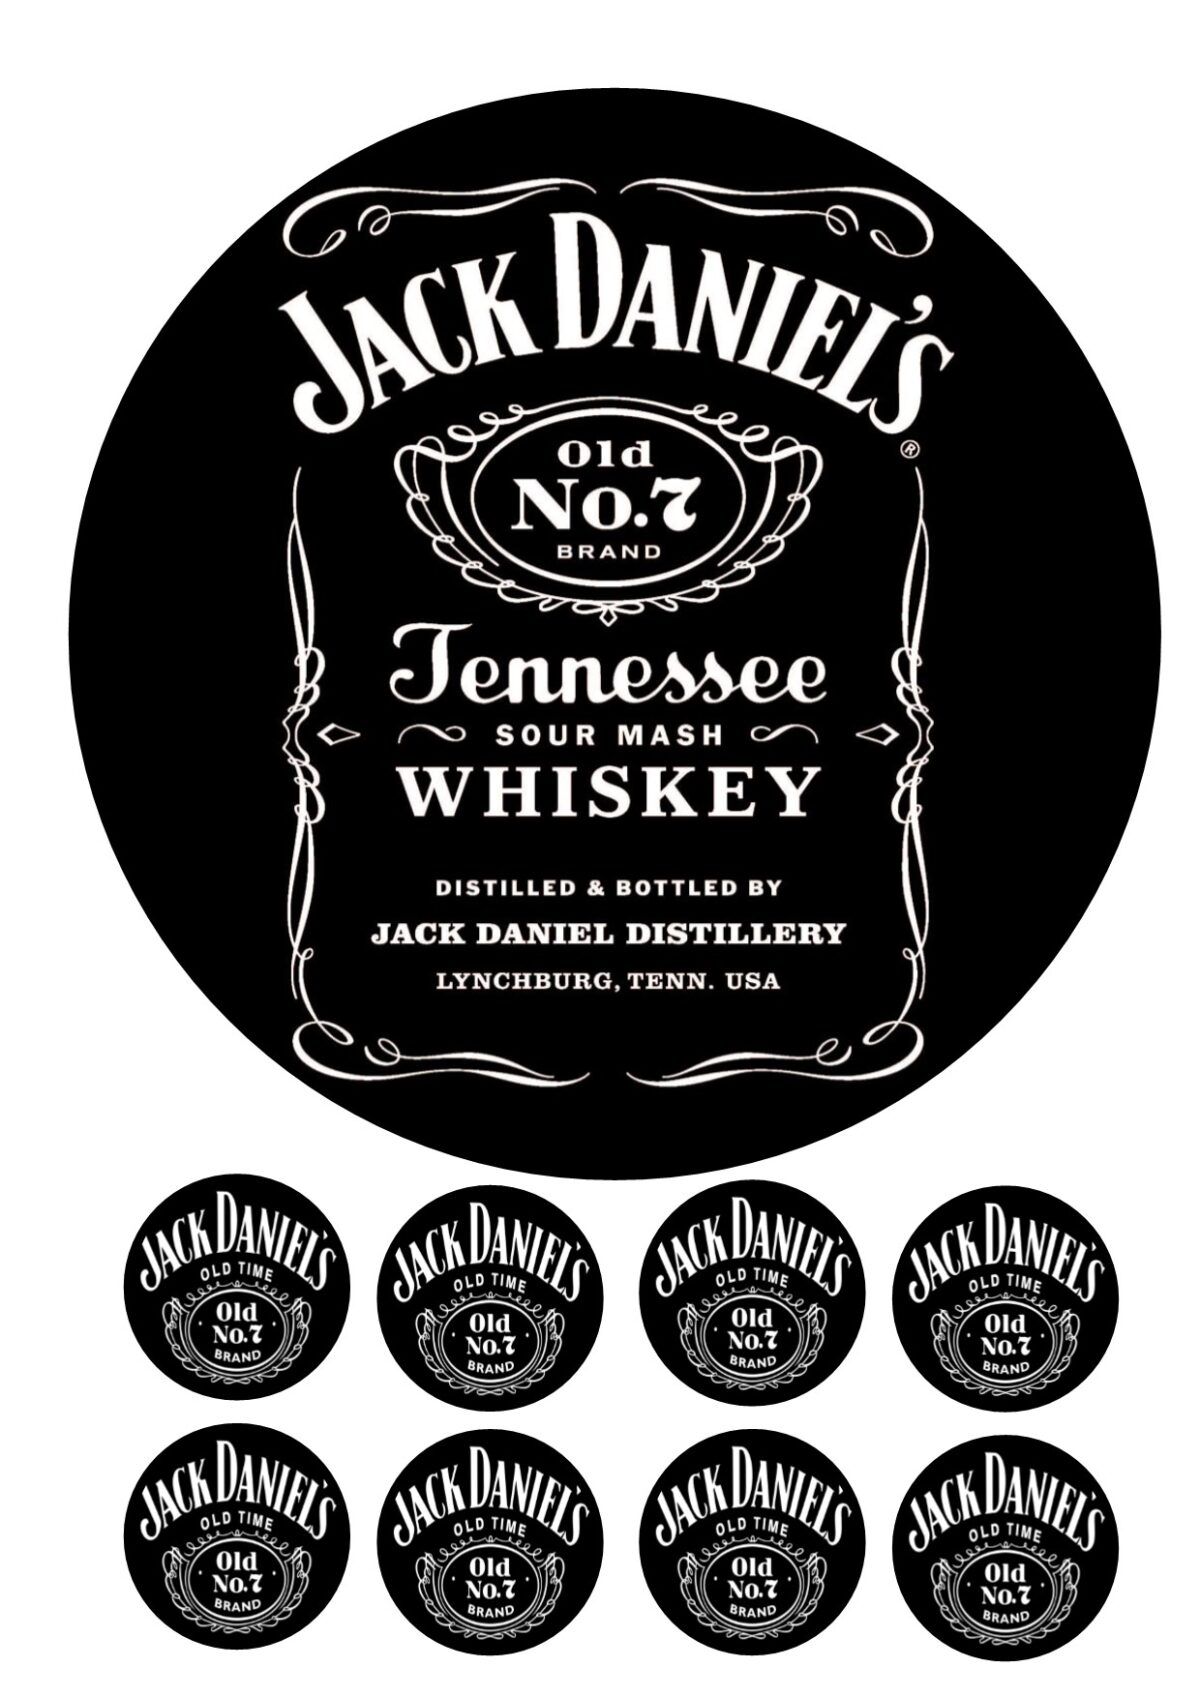 Jack Daniels icing birthday cake topper and cupcakes